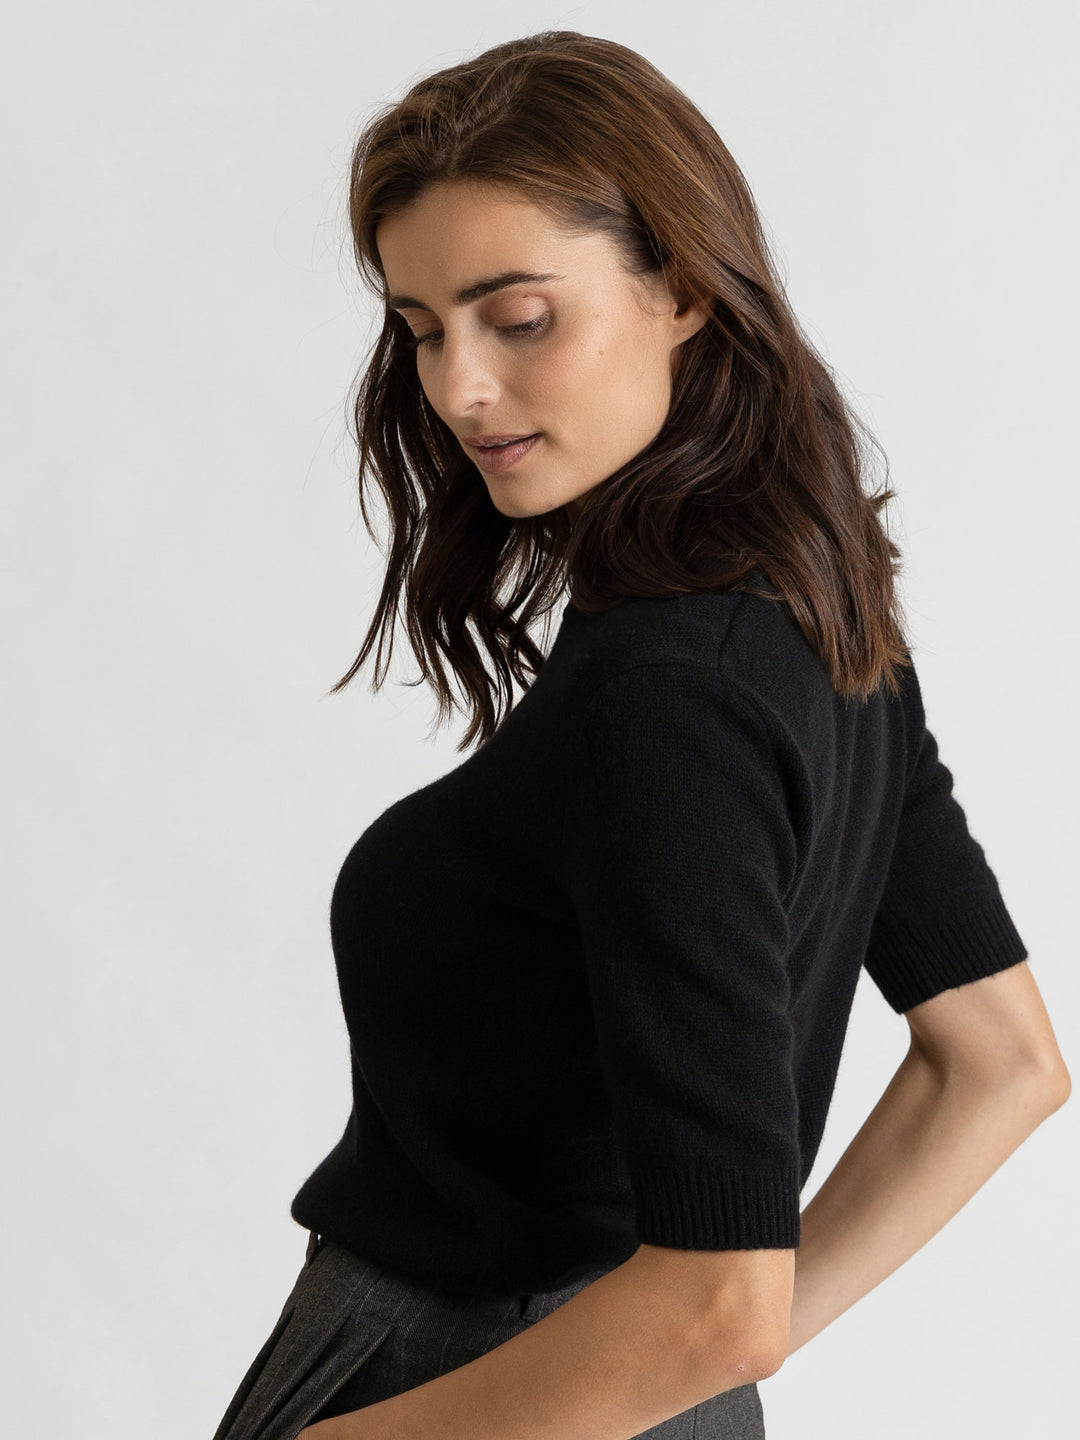 Short sleeved blac classic cashmere sweater from Kashmina Scandinavian design in 100% pure cashmere